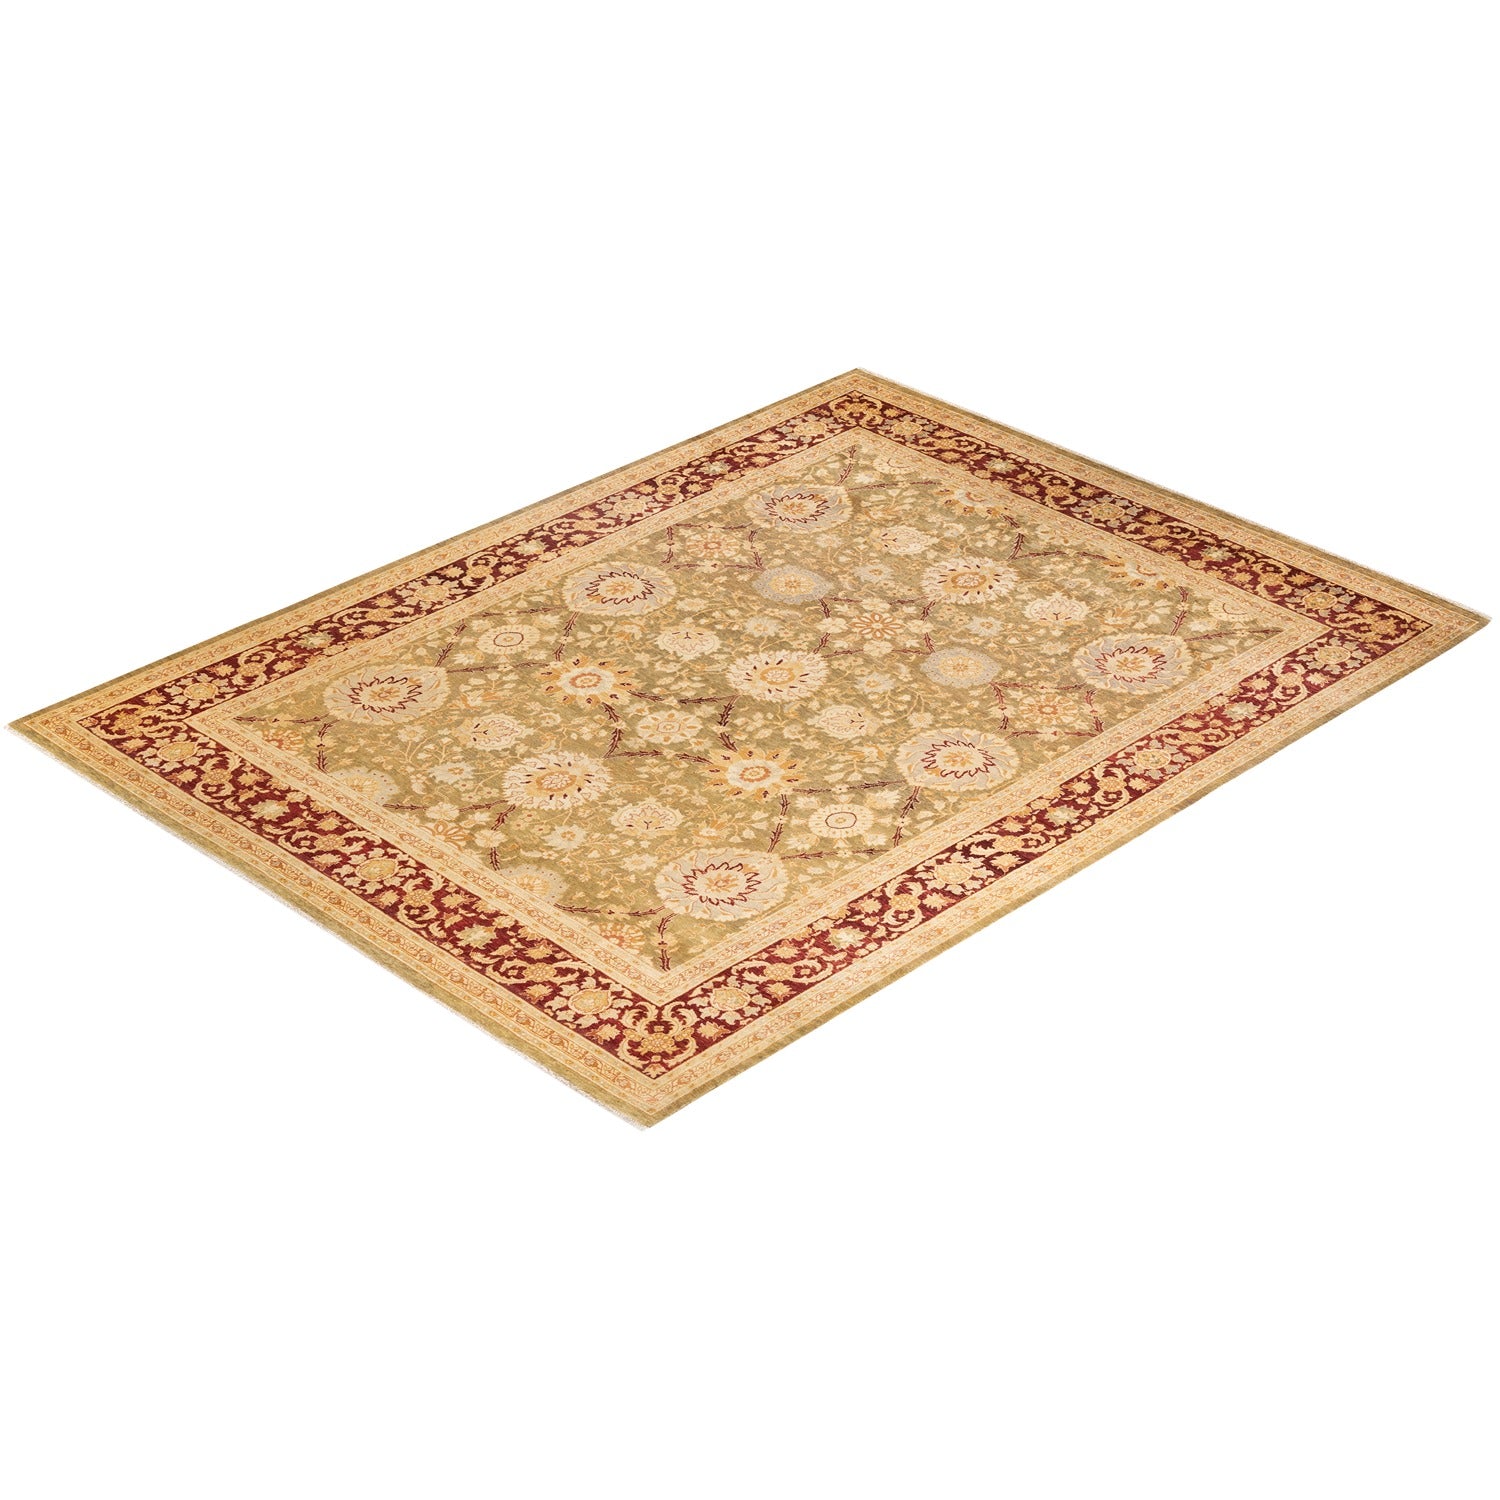 Intricate floral motif rectangular rug with Oriental-inspired design and border.